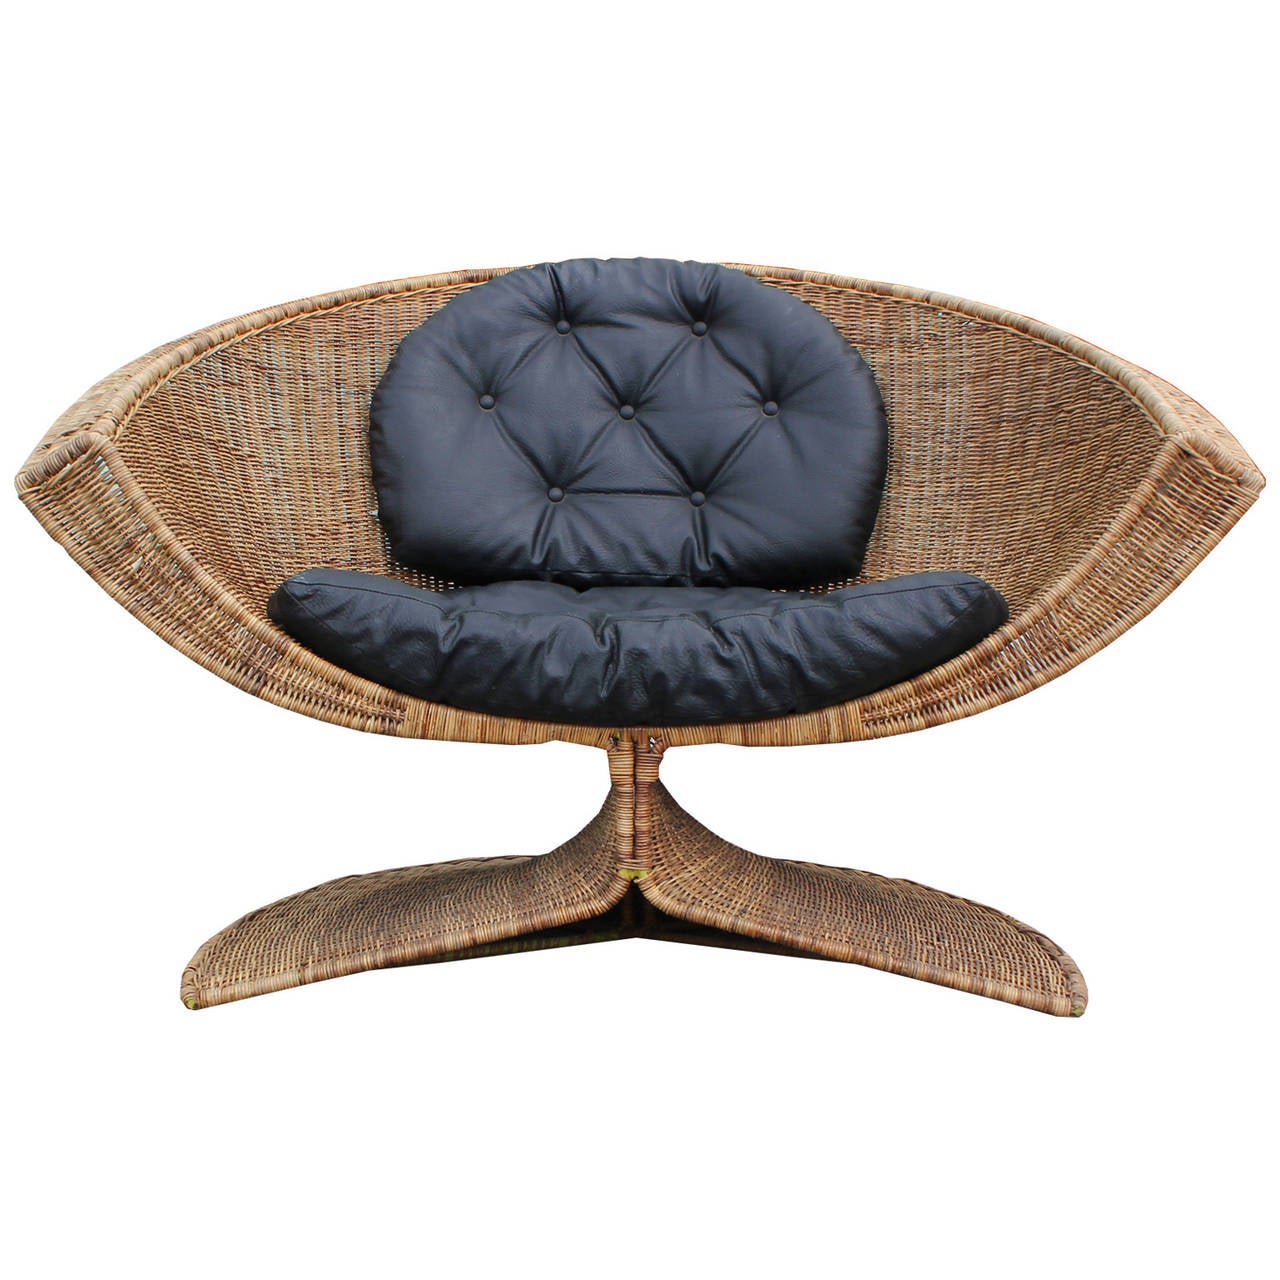 Lotus chair and ottoman by Miller Yee Fng for Tropi-cal designed in 1968. Rattan is in nice vintage condition. Chair retains original black vinyl cushions. Fabulous statement piece!

Ottoman measures 28